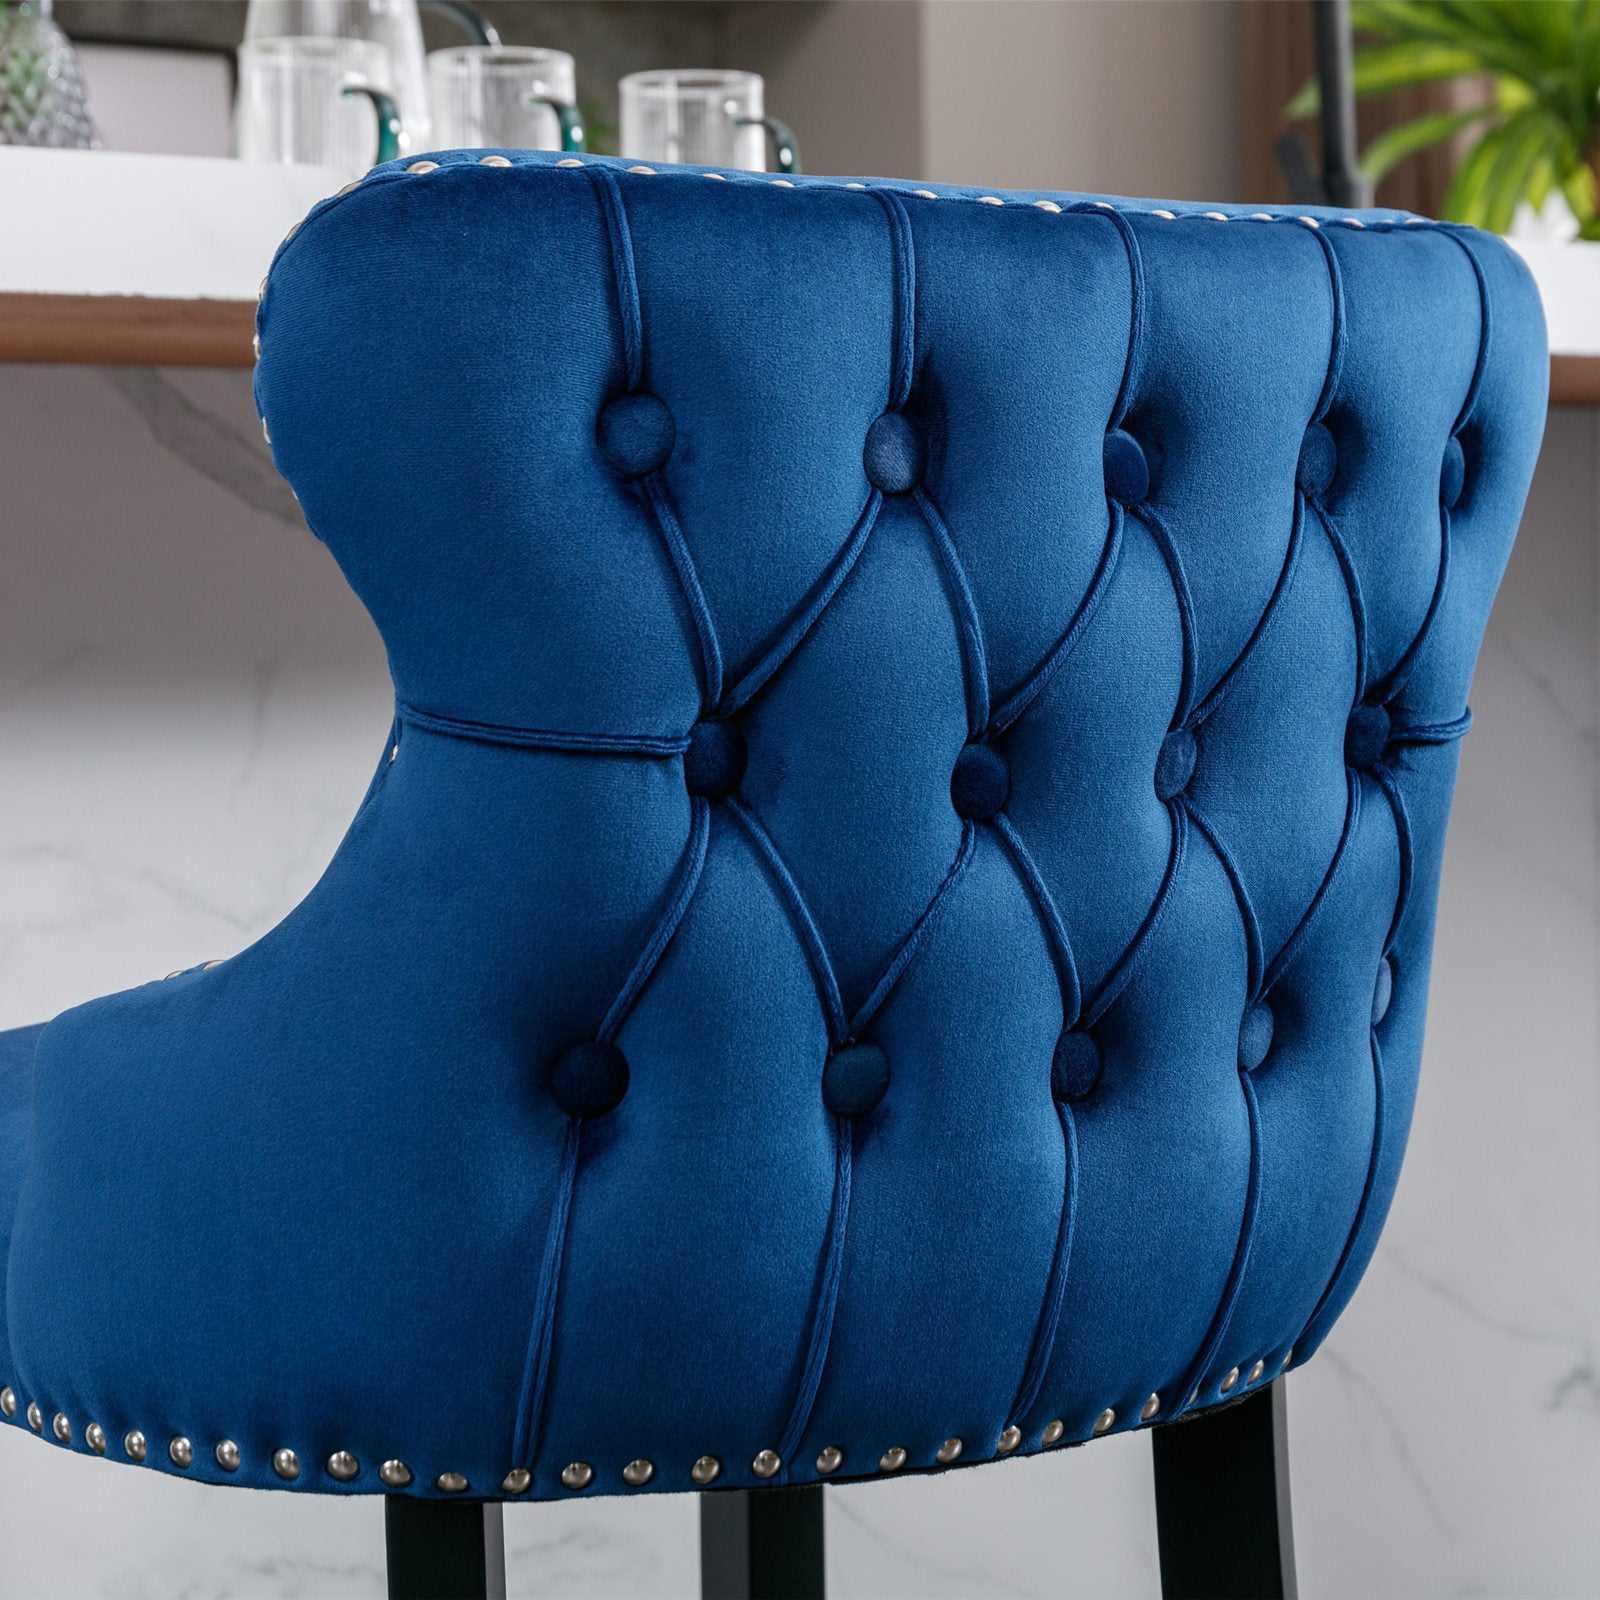 Set of 2 Blue Velvet Counter Stools With Tufted Back and Nailhead Trim